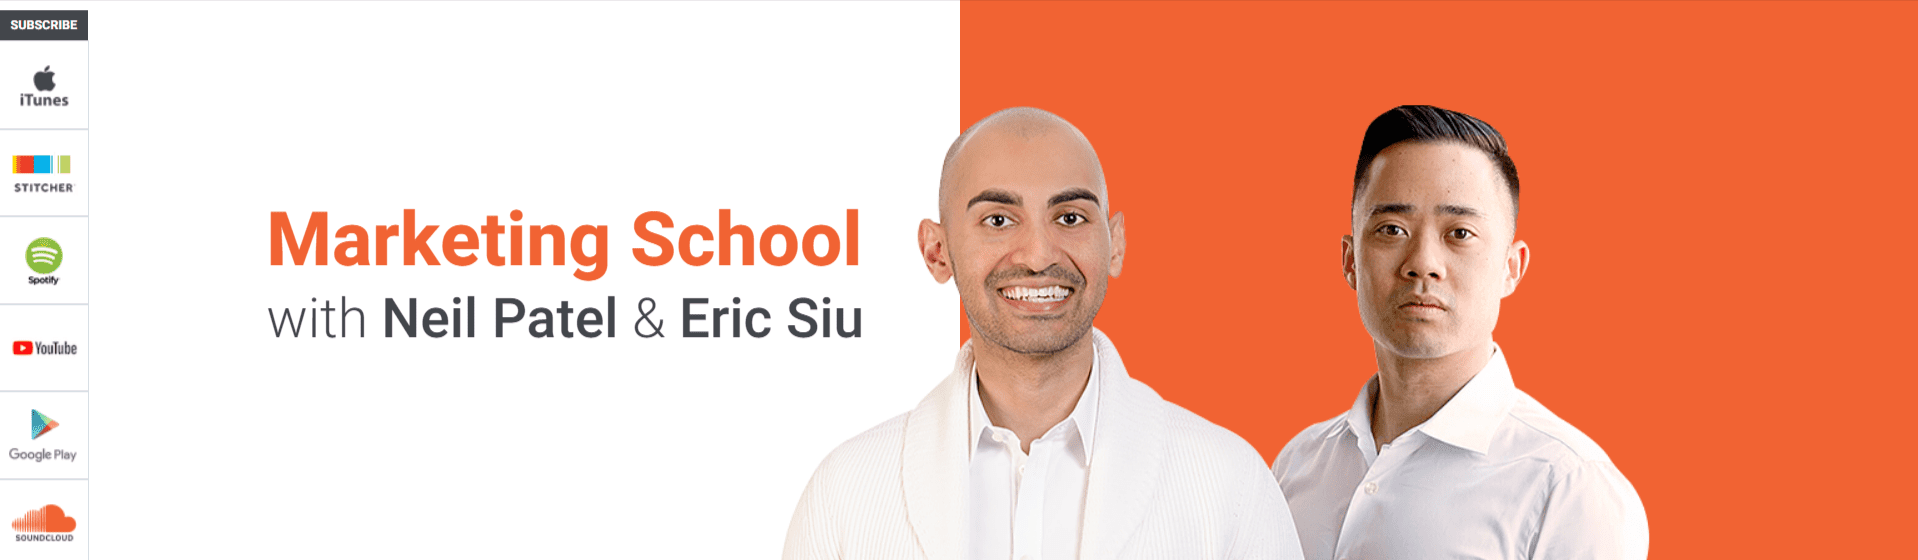 Marketing School with Neil Patel and Eric Siu 